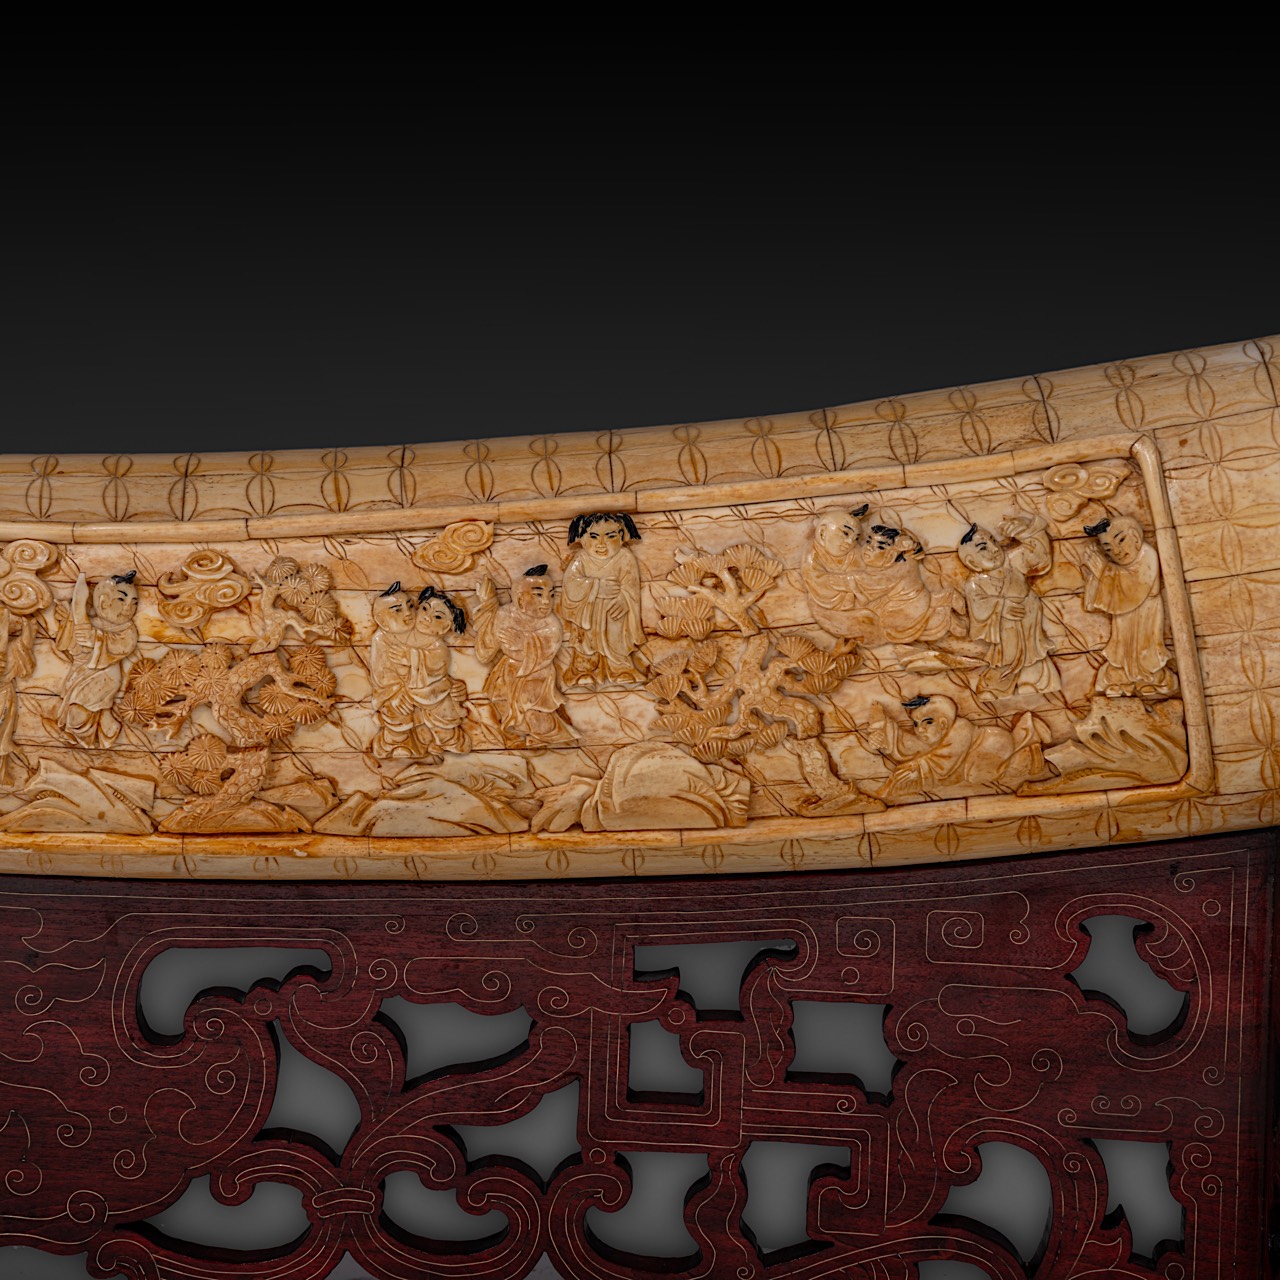 Tusk made from sculpted bone slats, Qing/Republic period, inner arch 165 cm - outer arch 175 cm - Image 11 of 13